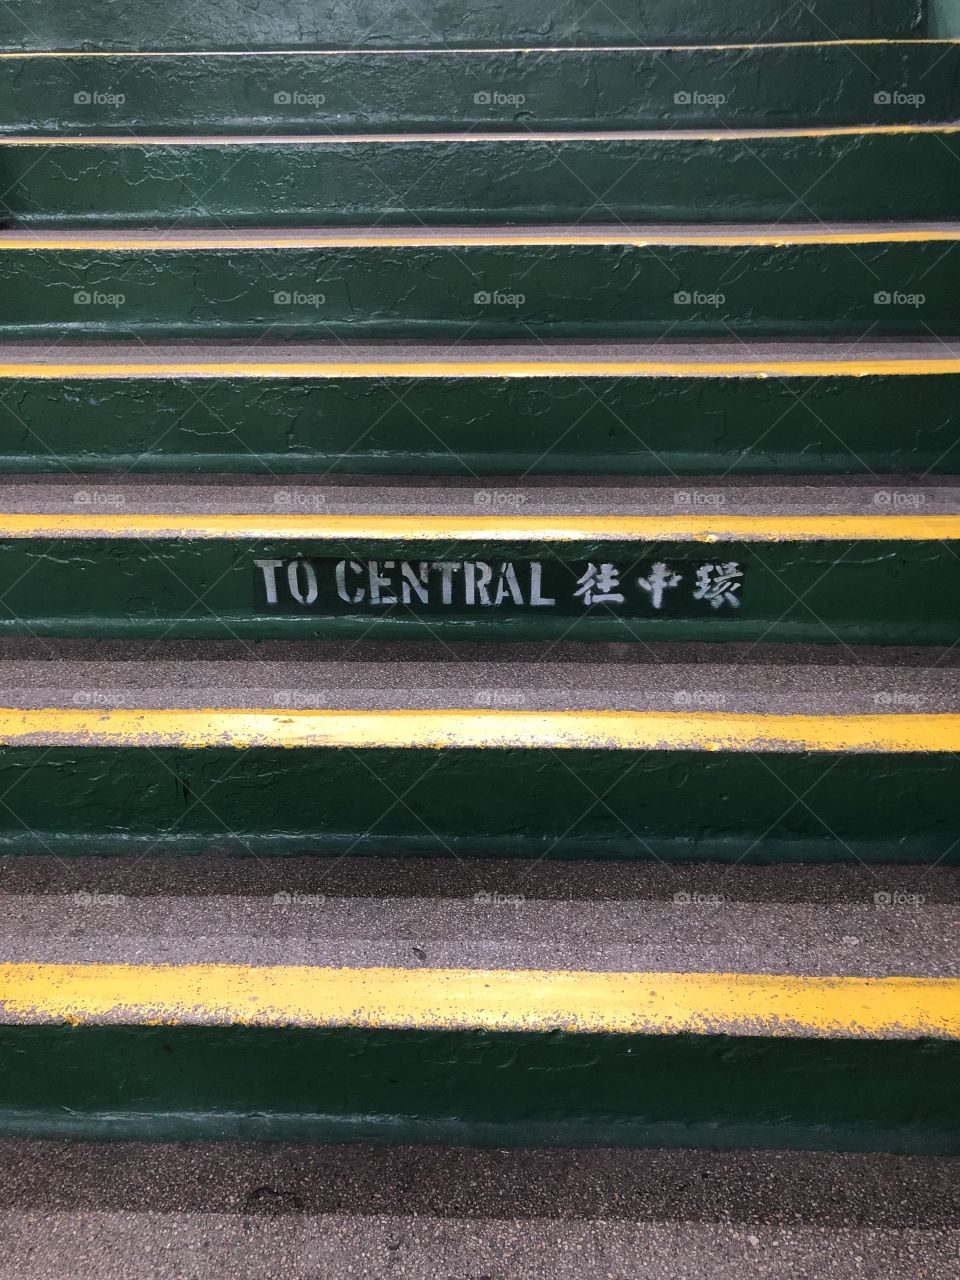 To Central (Pier)